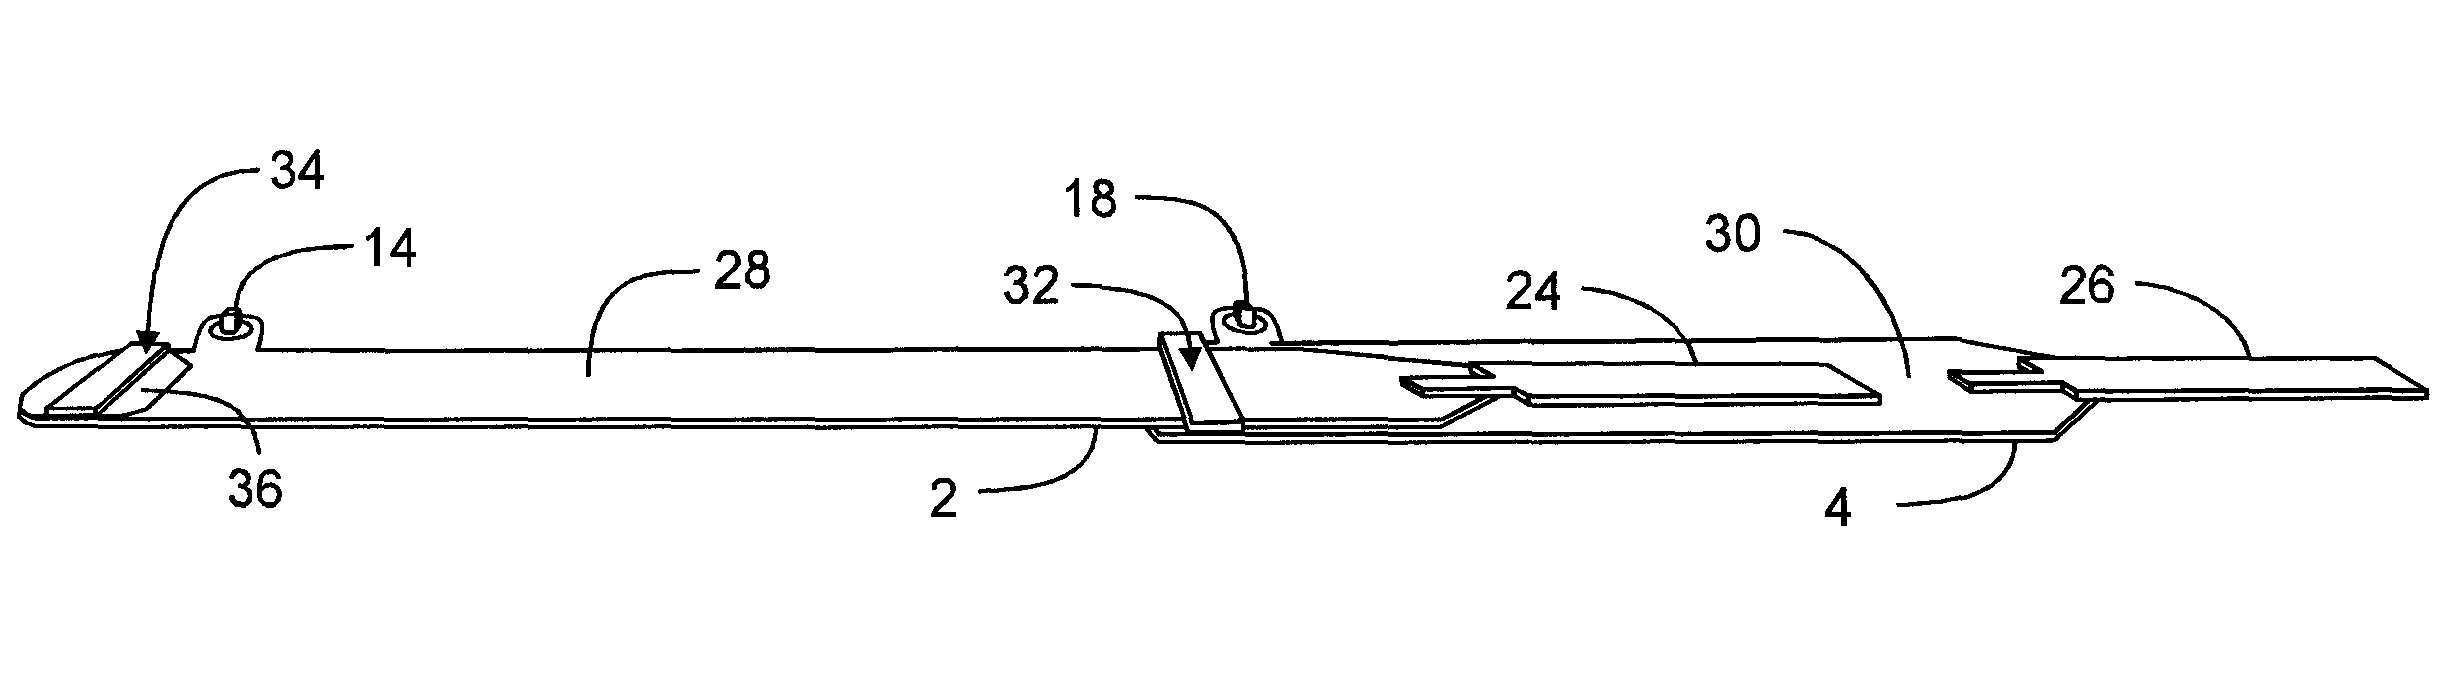 Extendible tourniquet cuff with stabilizer for improved utility and safety